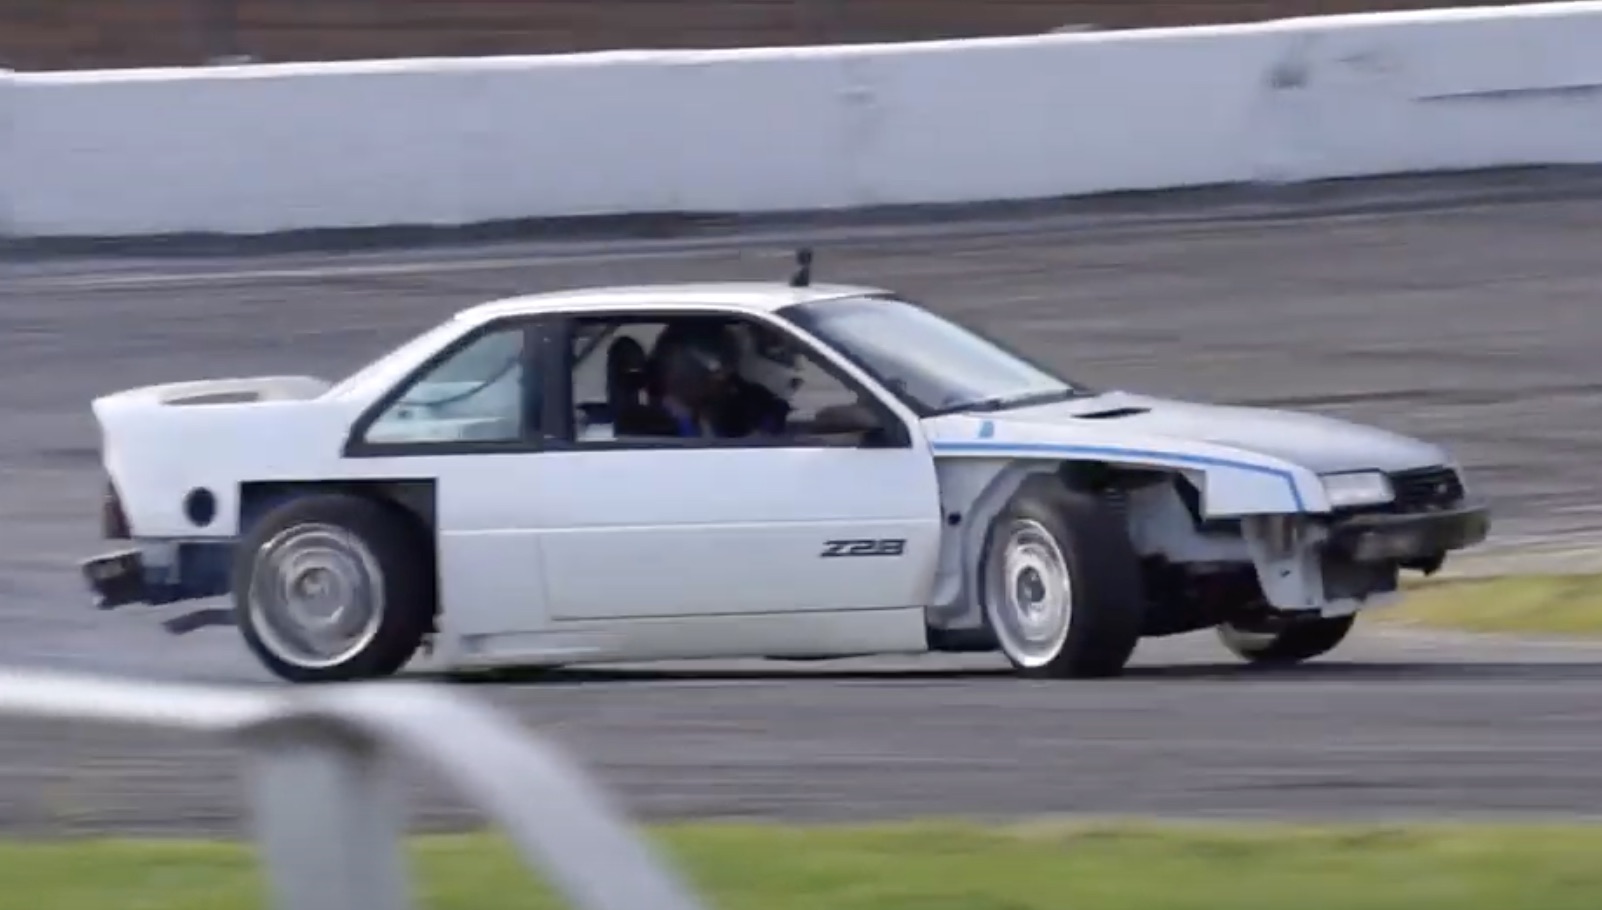 Drift Beretta: How Chevy’s Front-Drive Two-Door Got Blended With A Camaro To Create This Monster!